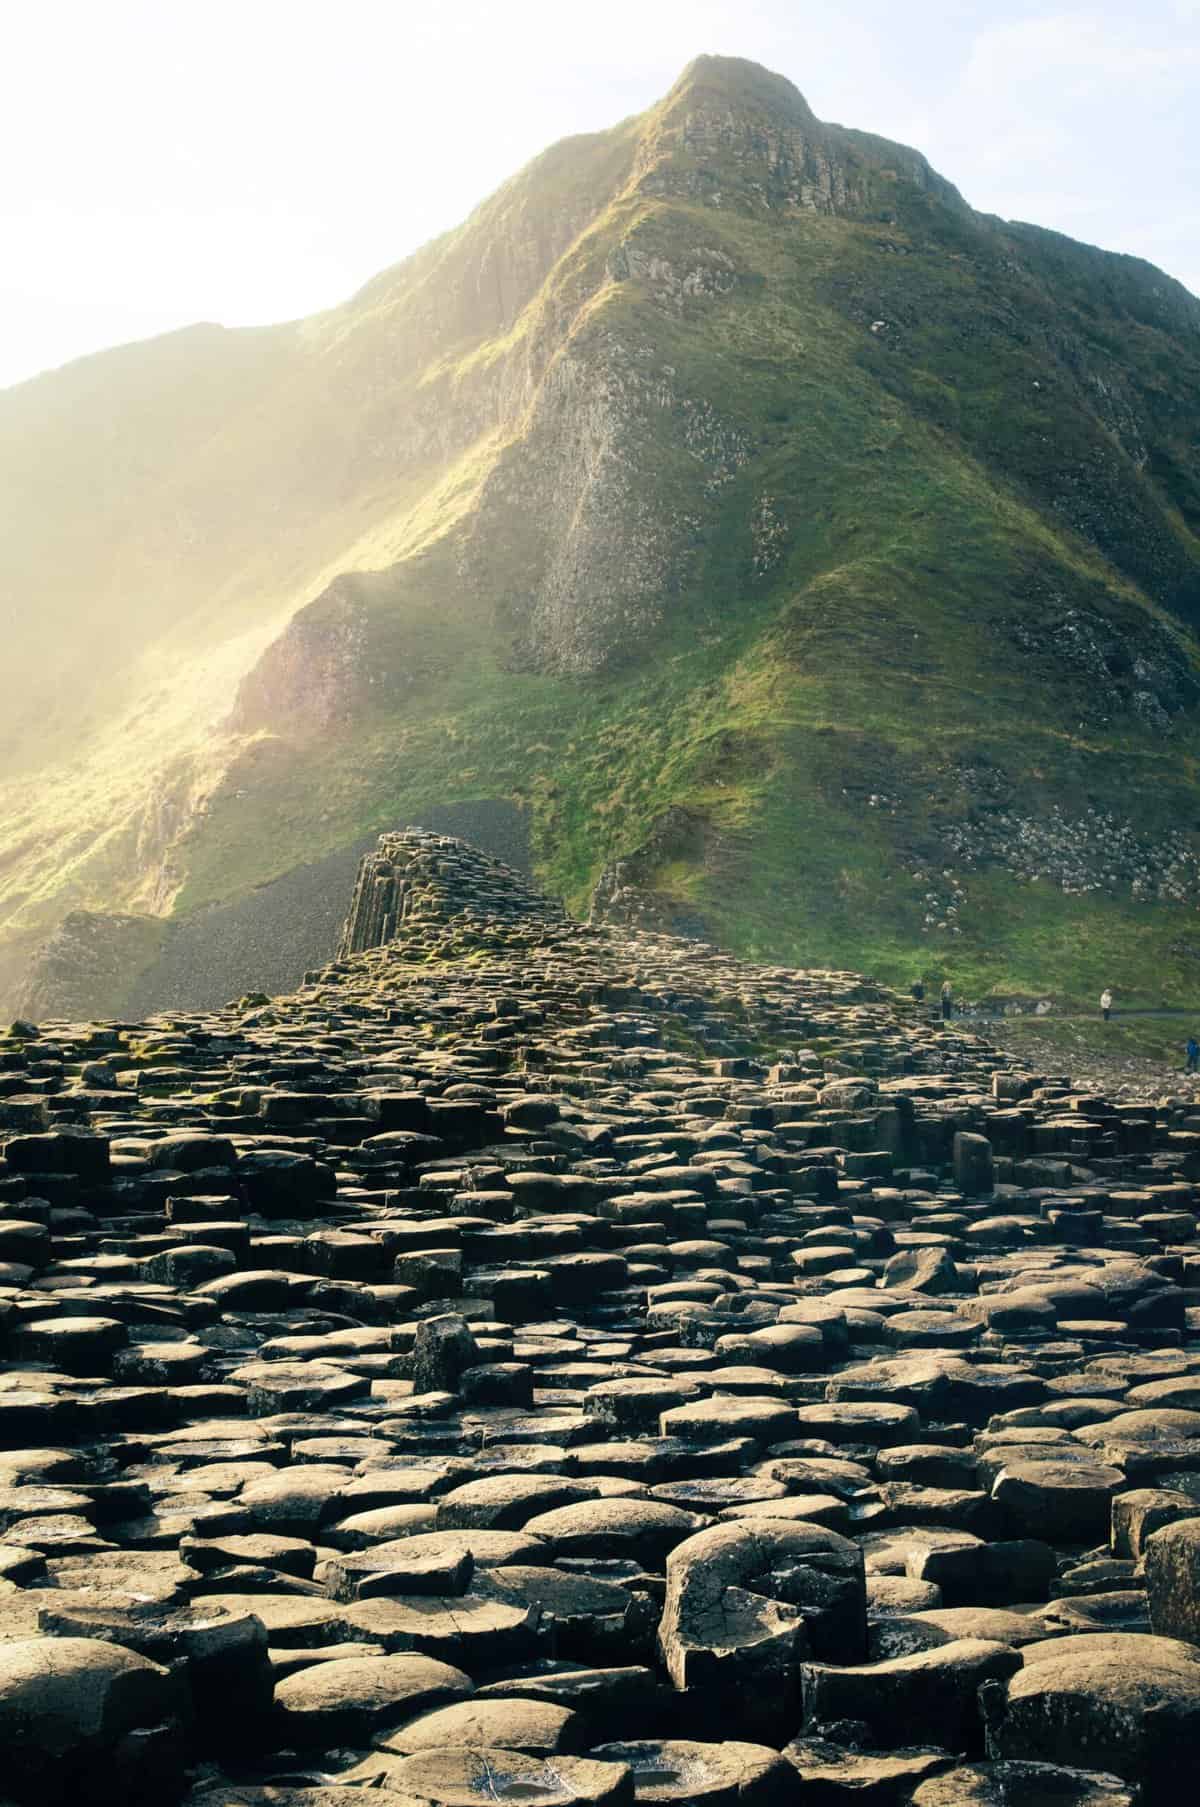 Giants Causeway stones in front of a green mountain 